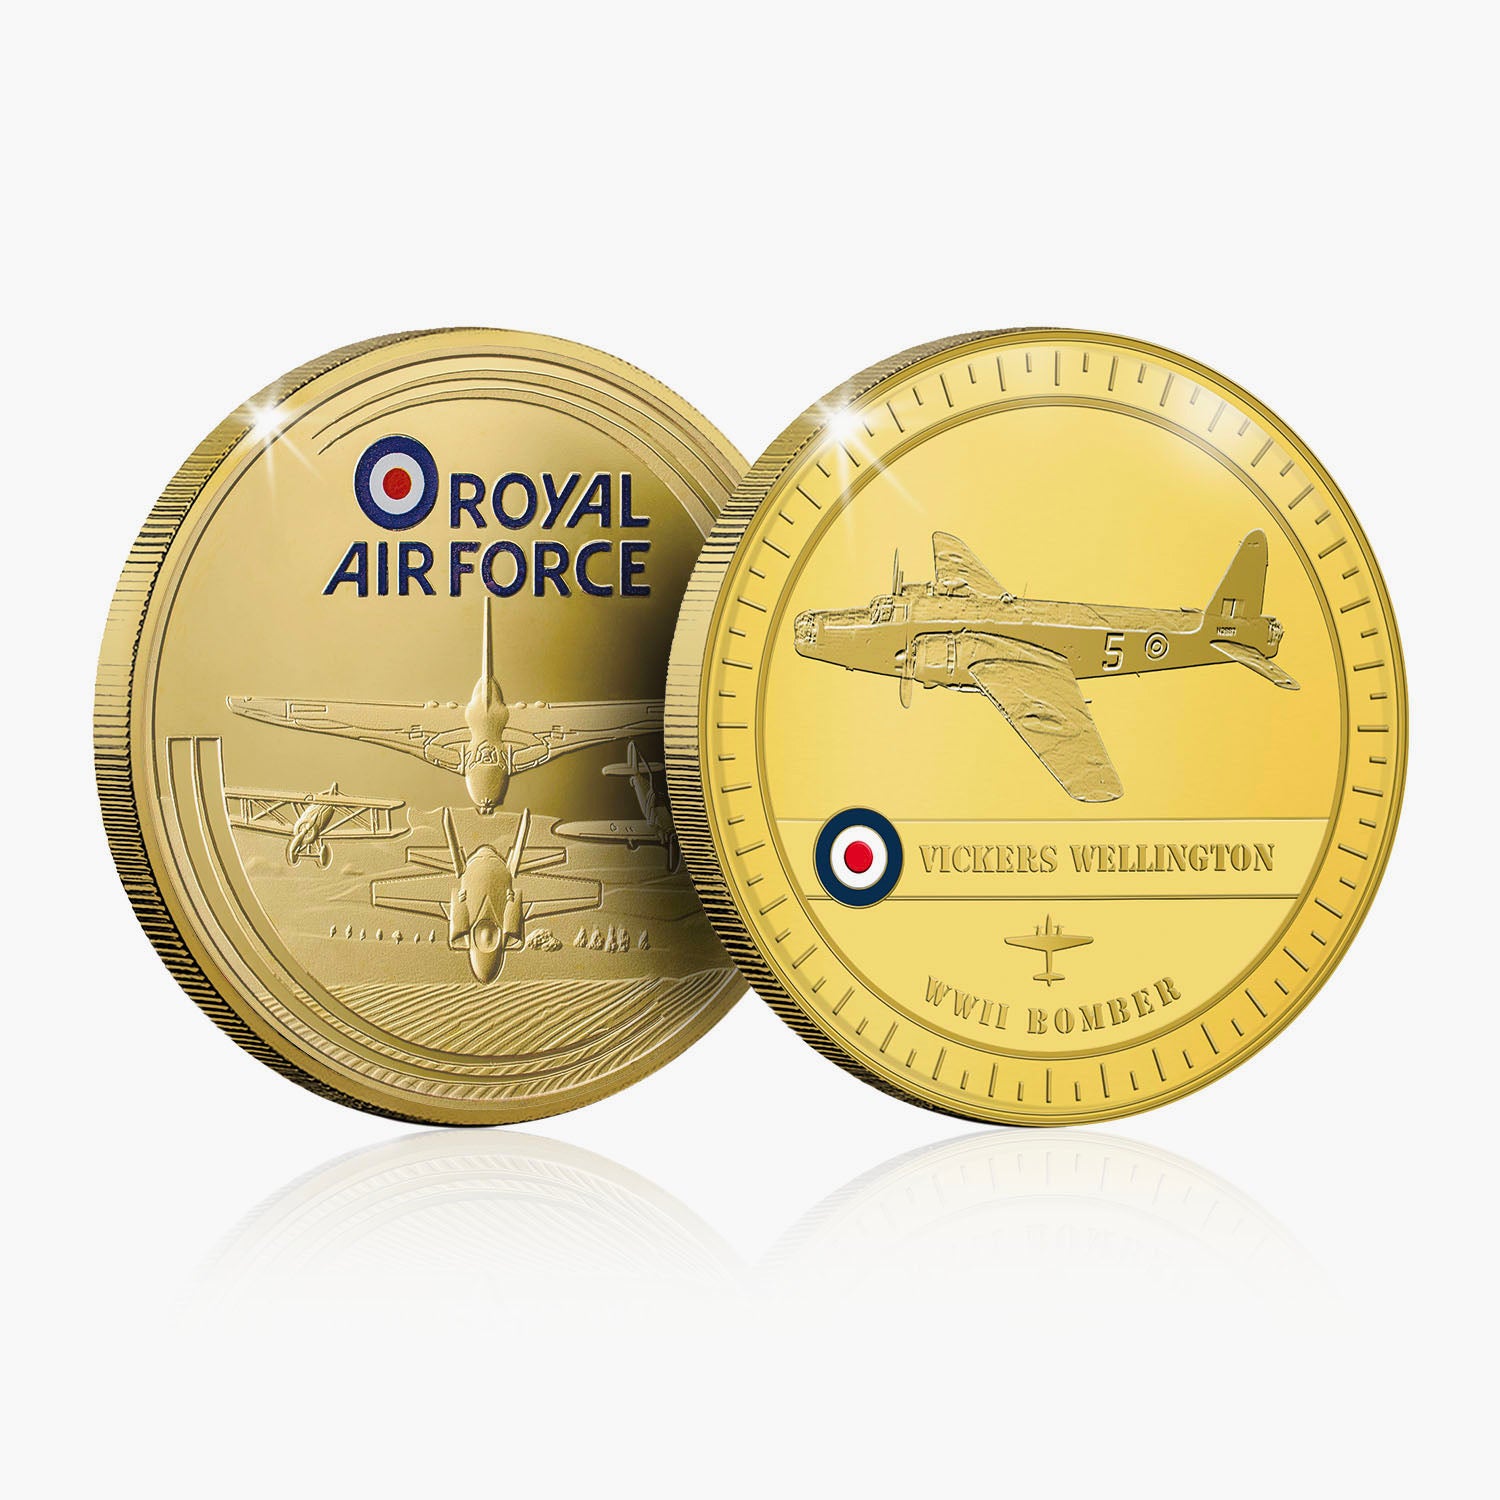 Vickers Wellington Gold-Plated Commemorative